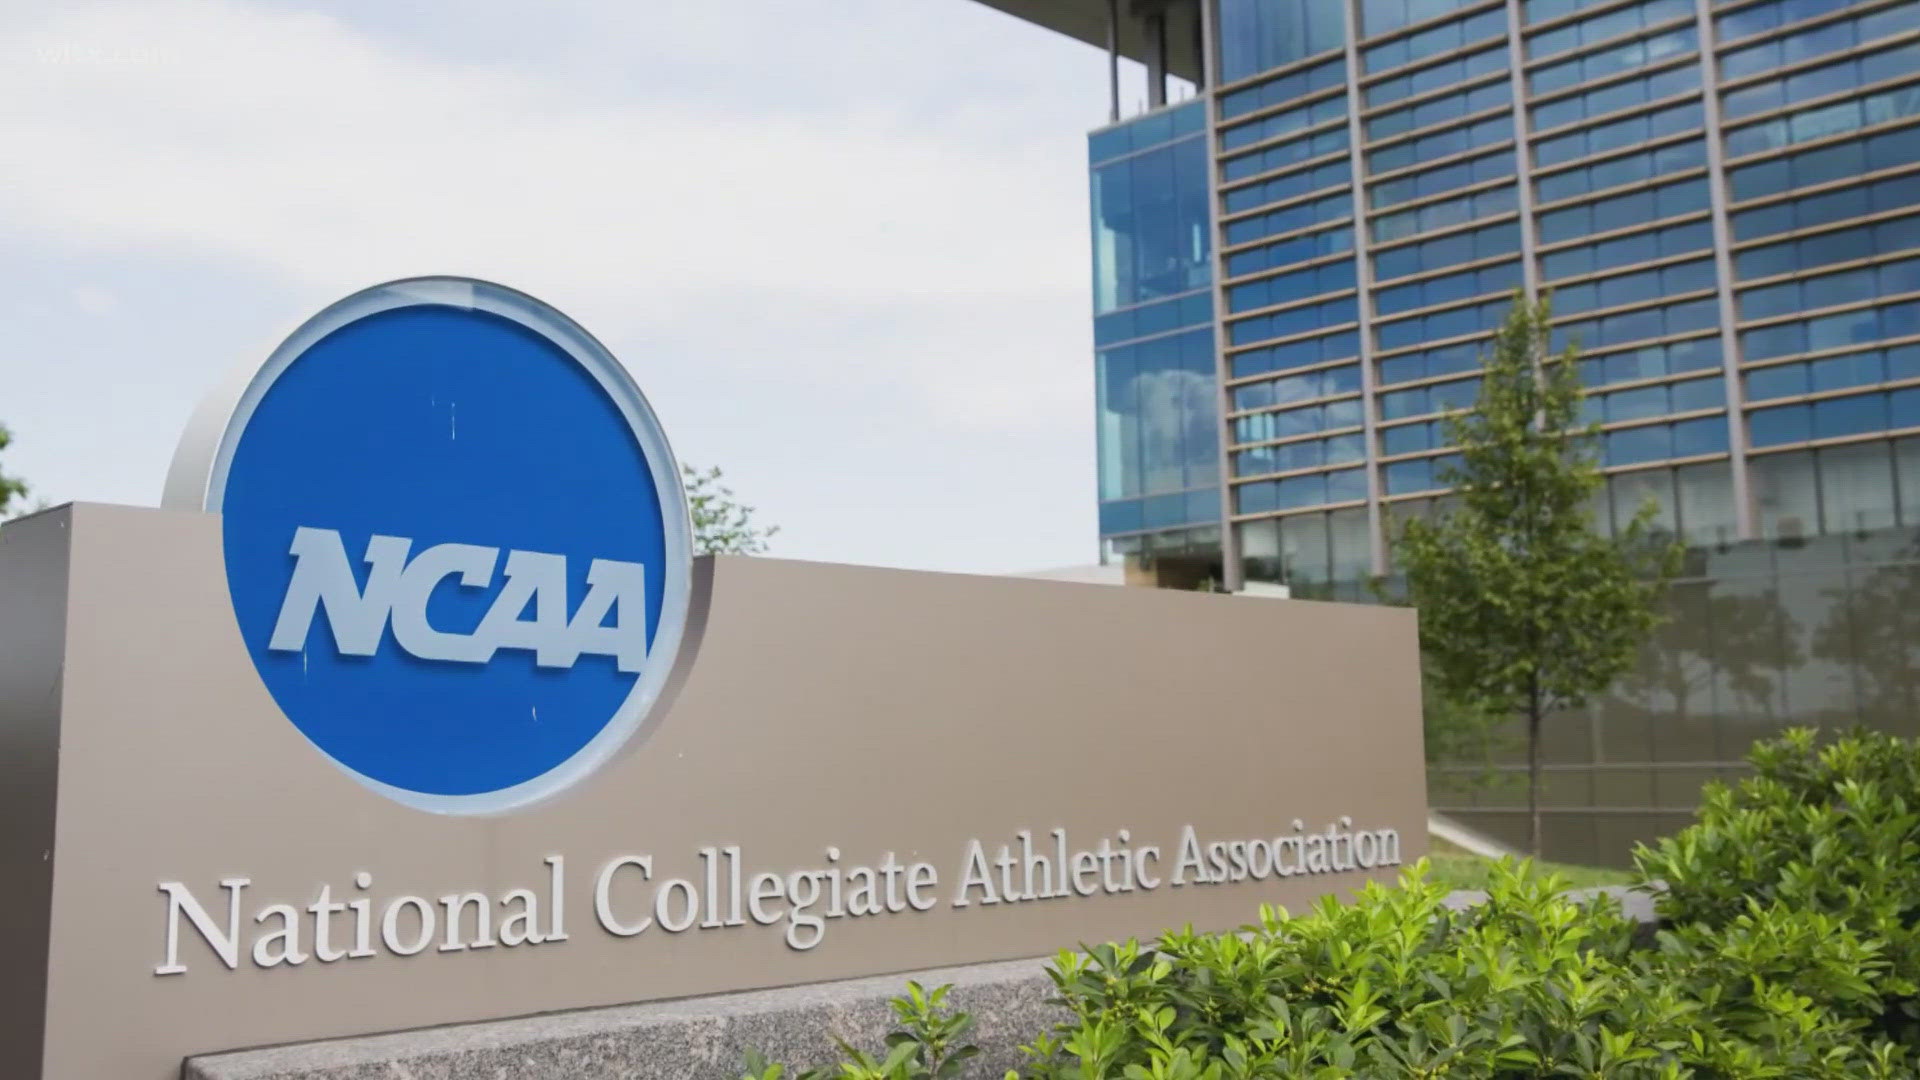 Once approved by a judge, the deal will mark the beginning of a new era in college sports where athletes are compensated more like professionals.